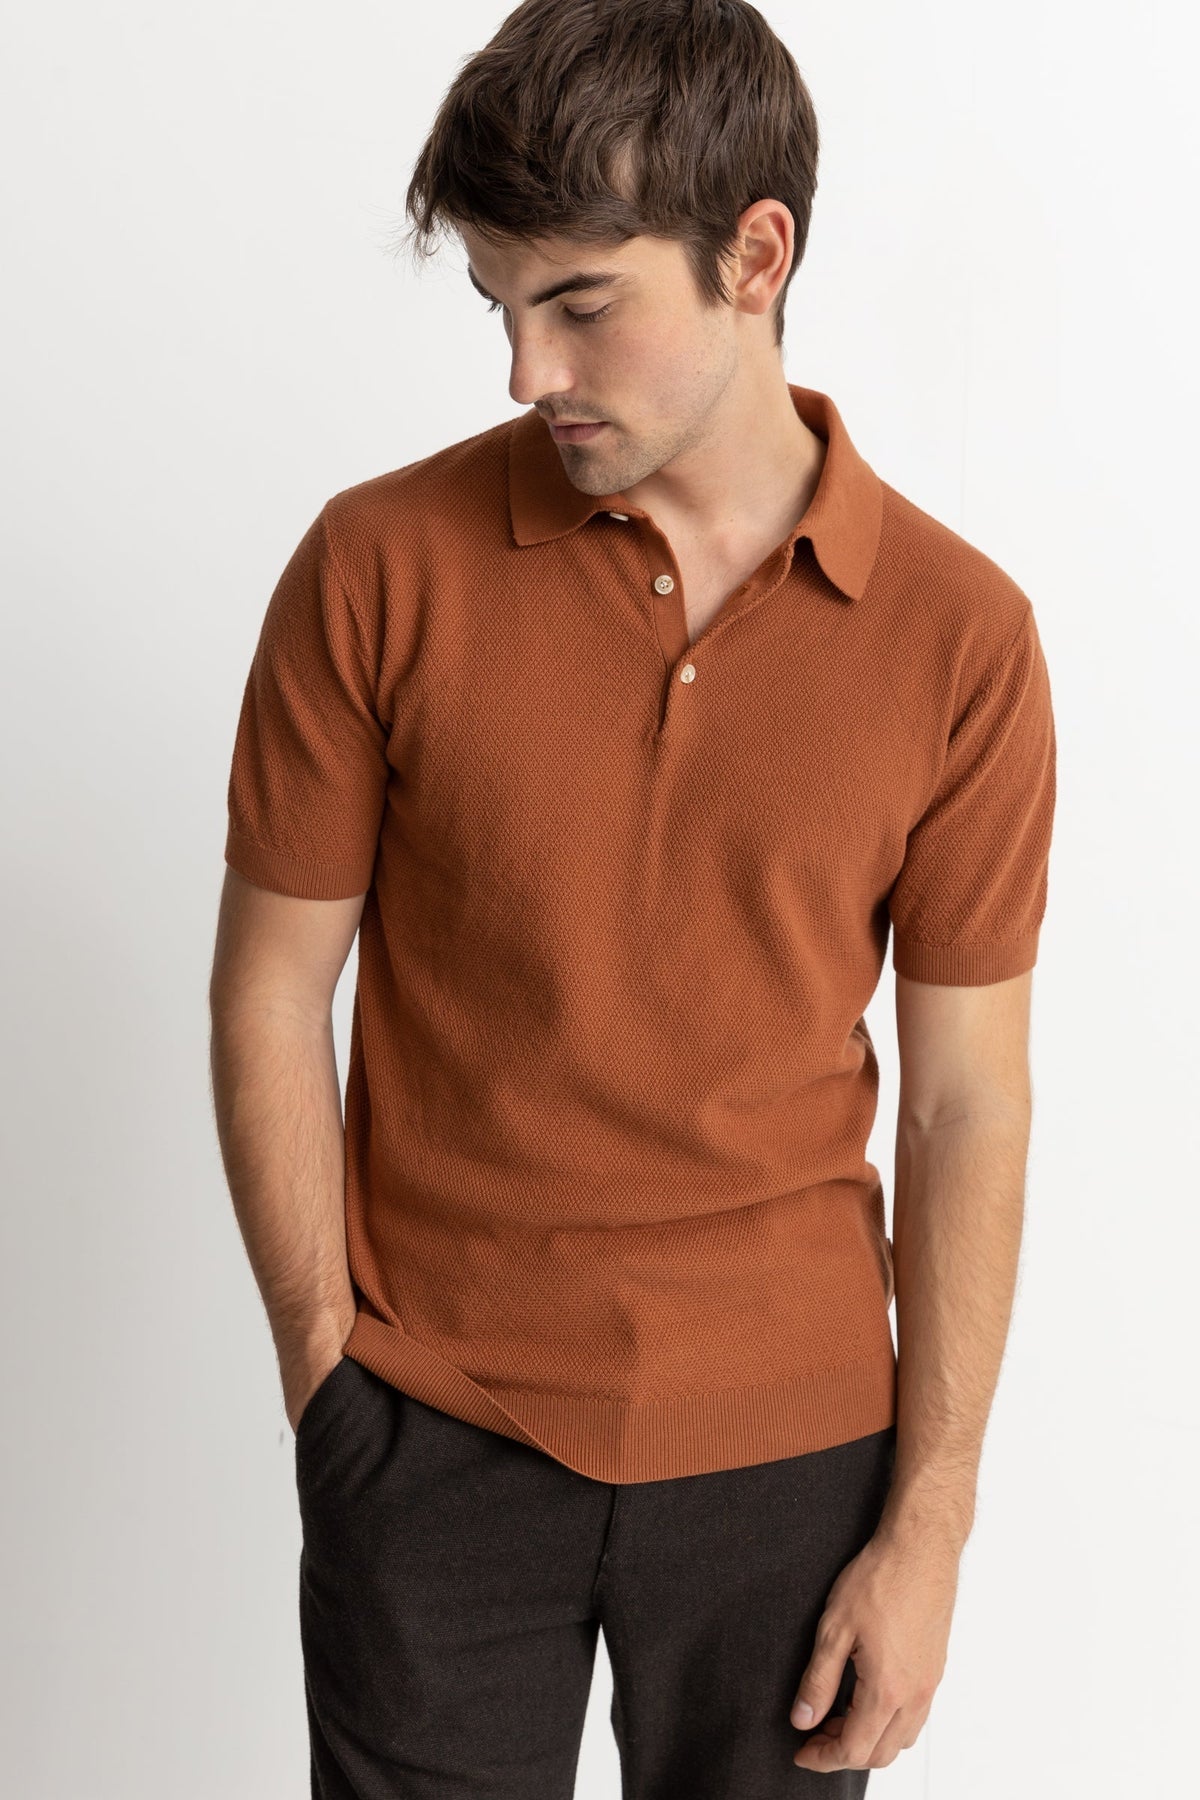 Textured Knit S/S Polo - Clay